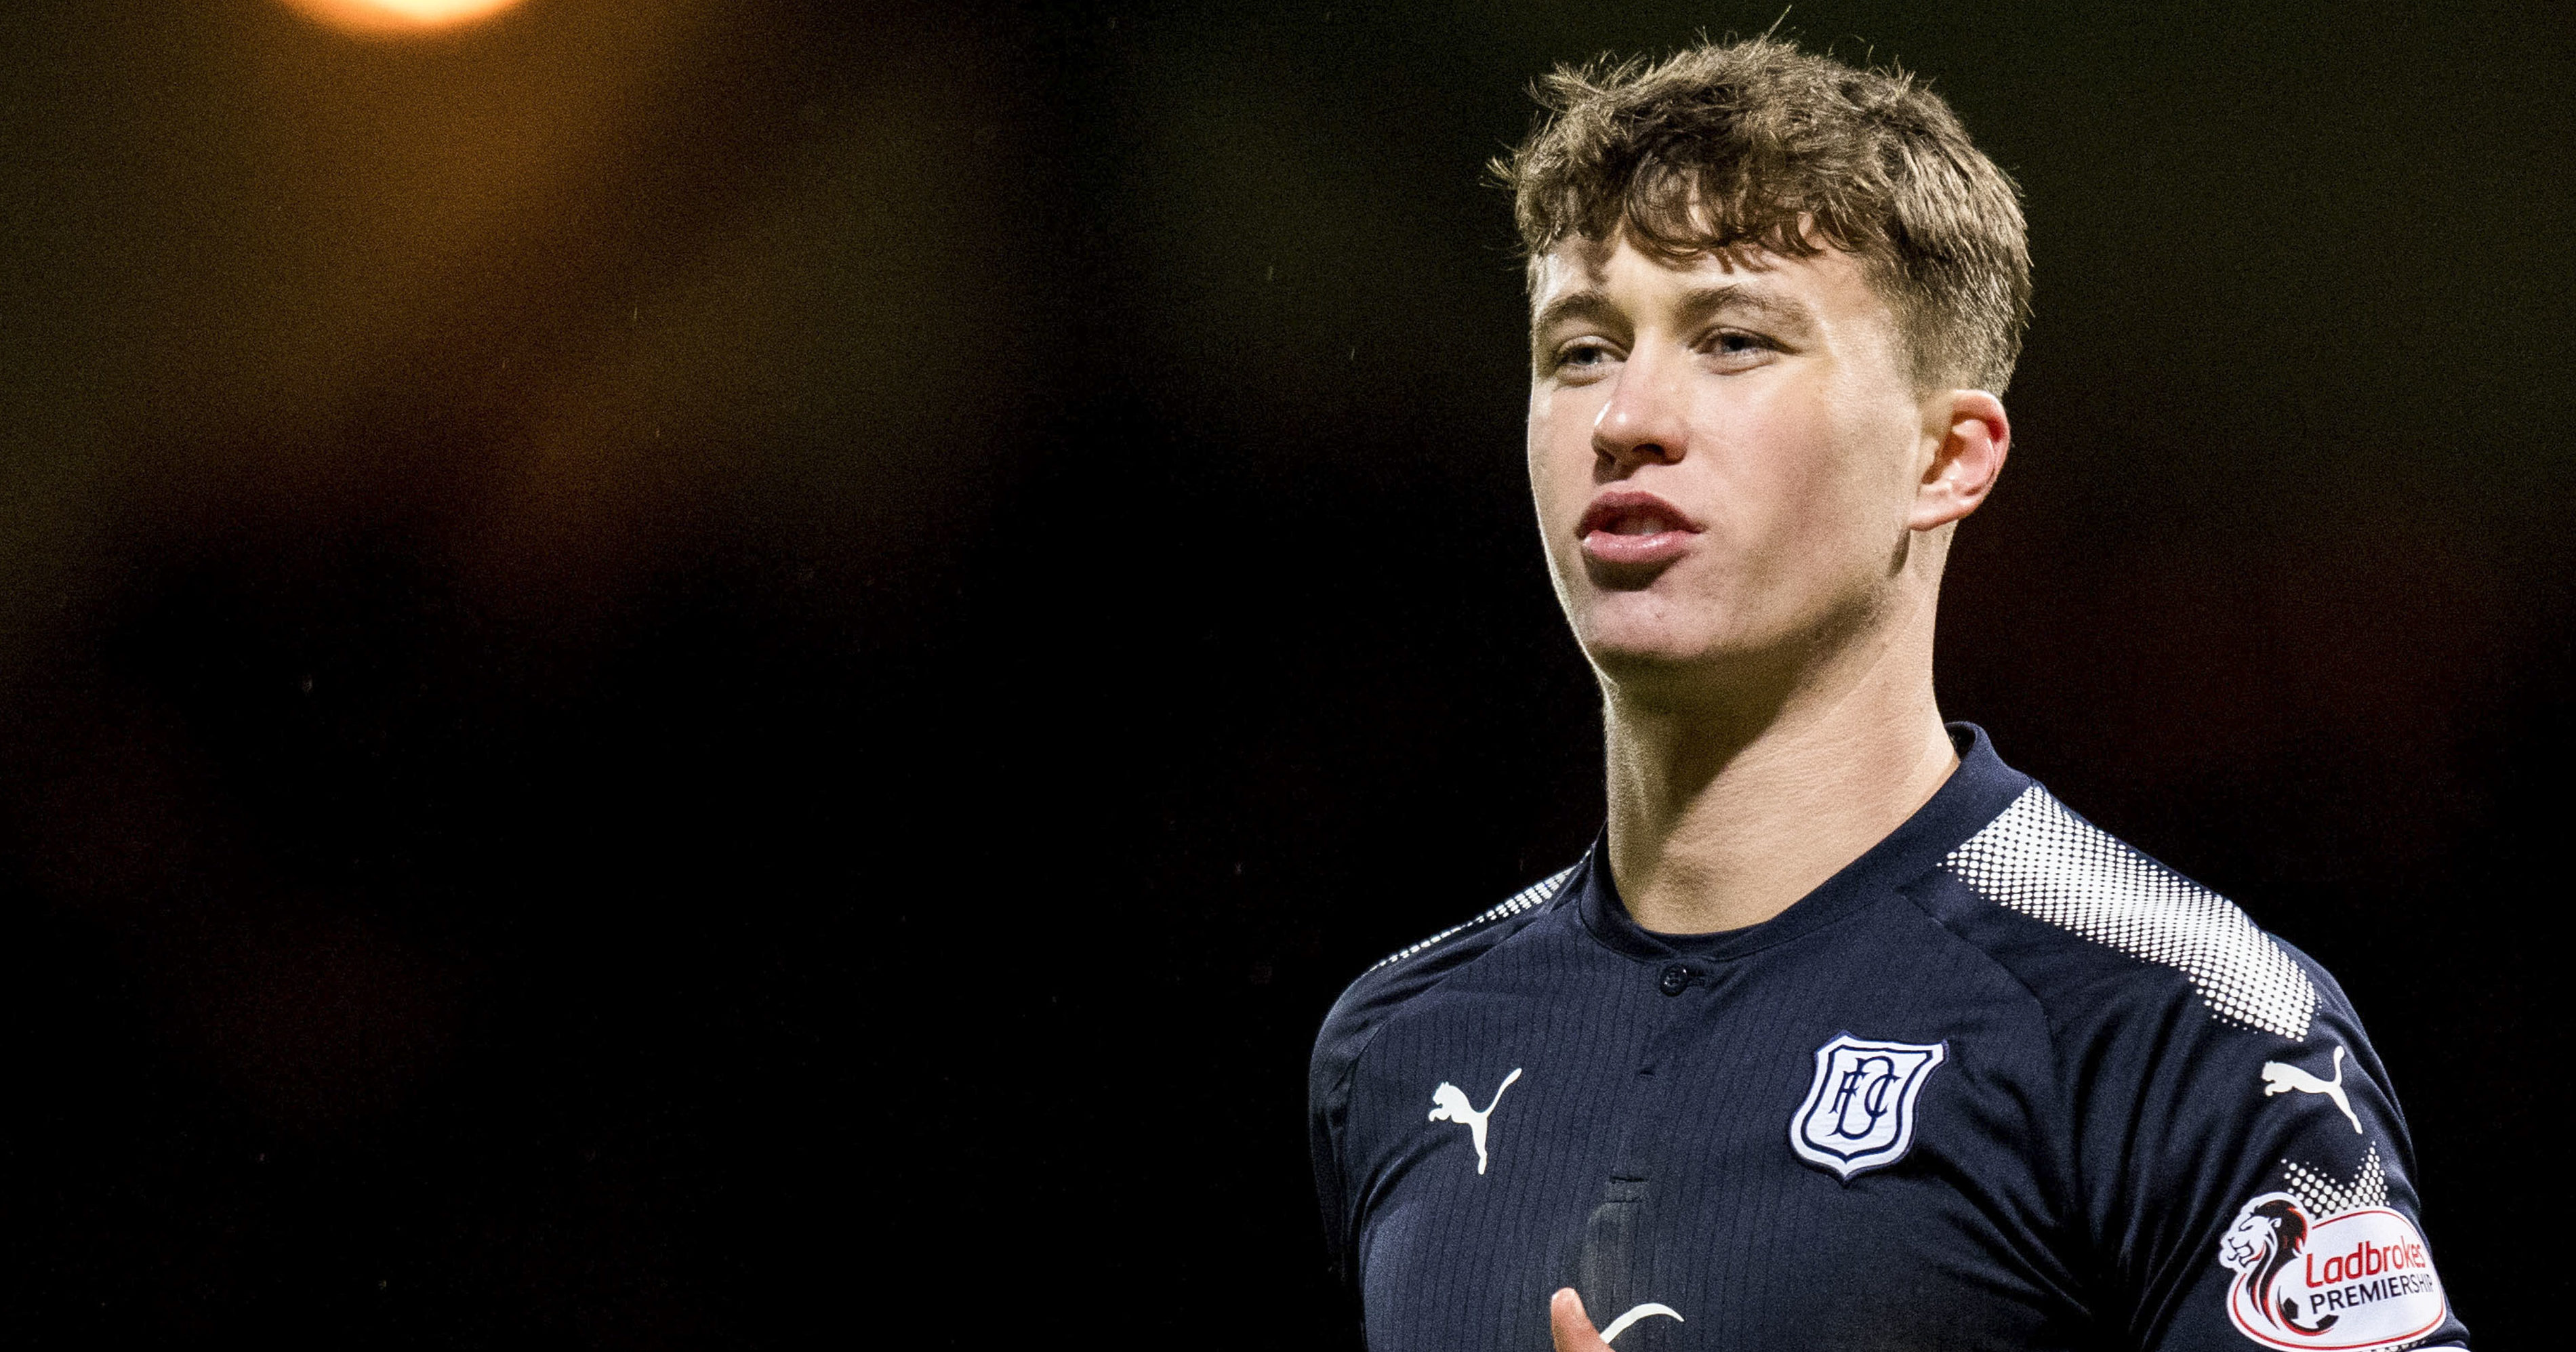 Former Dundee player Jack Hendry